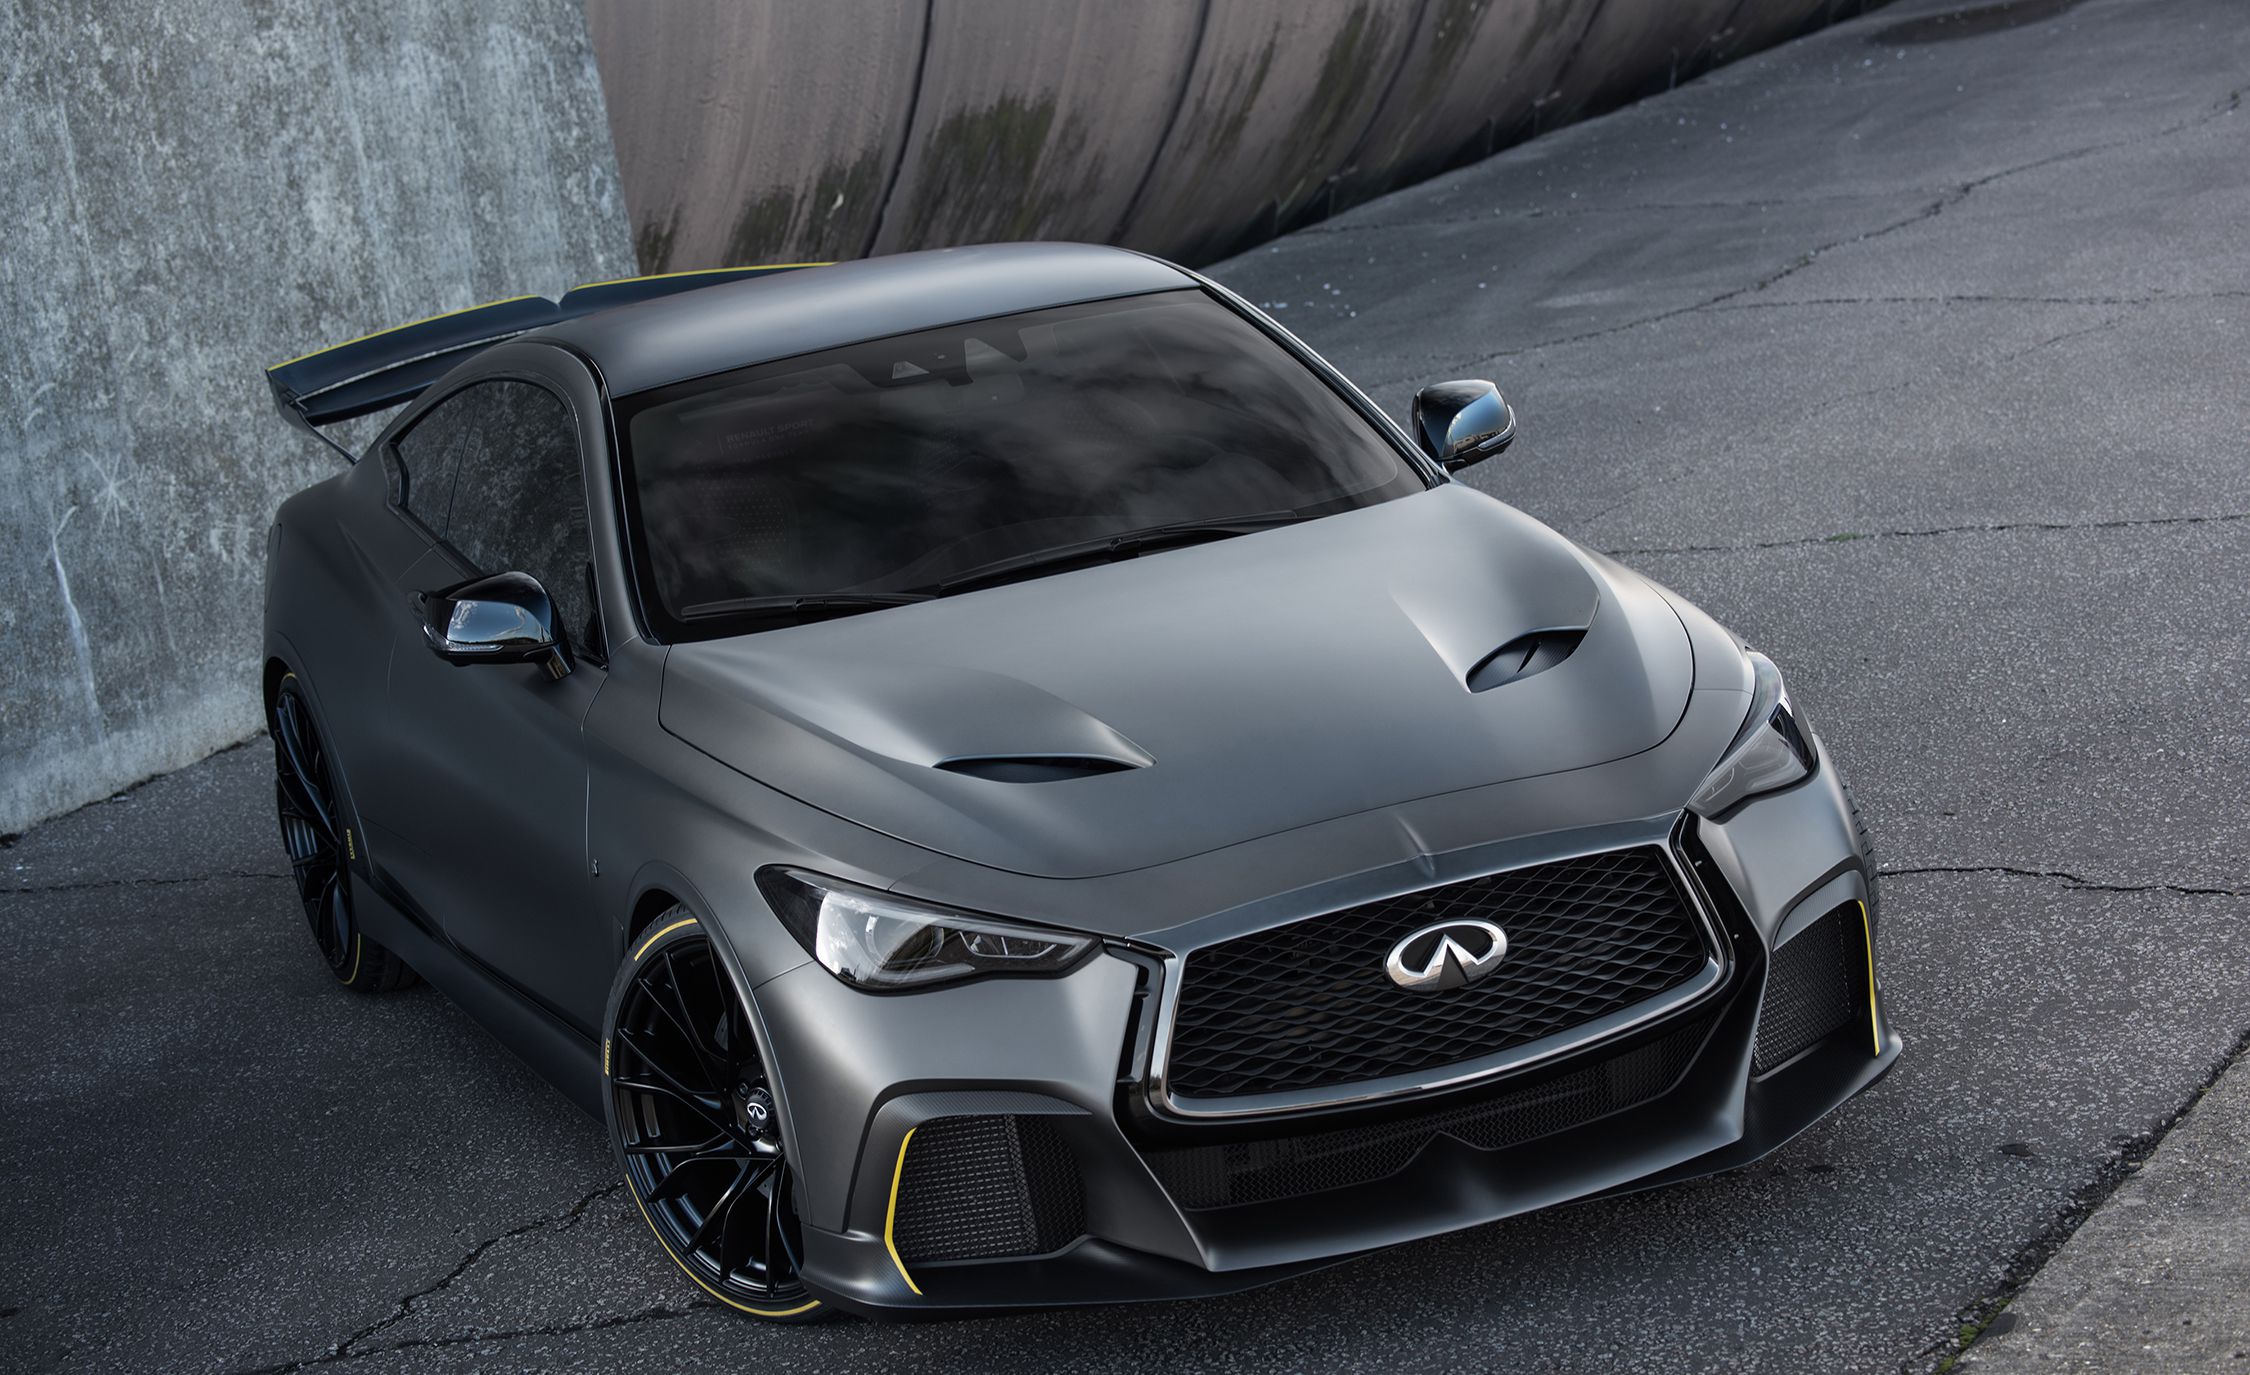 Is the Project Black S Prototype the Infiniti We’ve Been Waiting For?